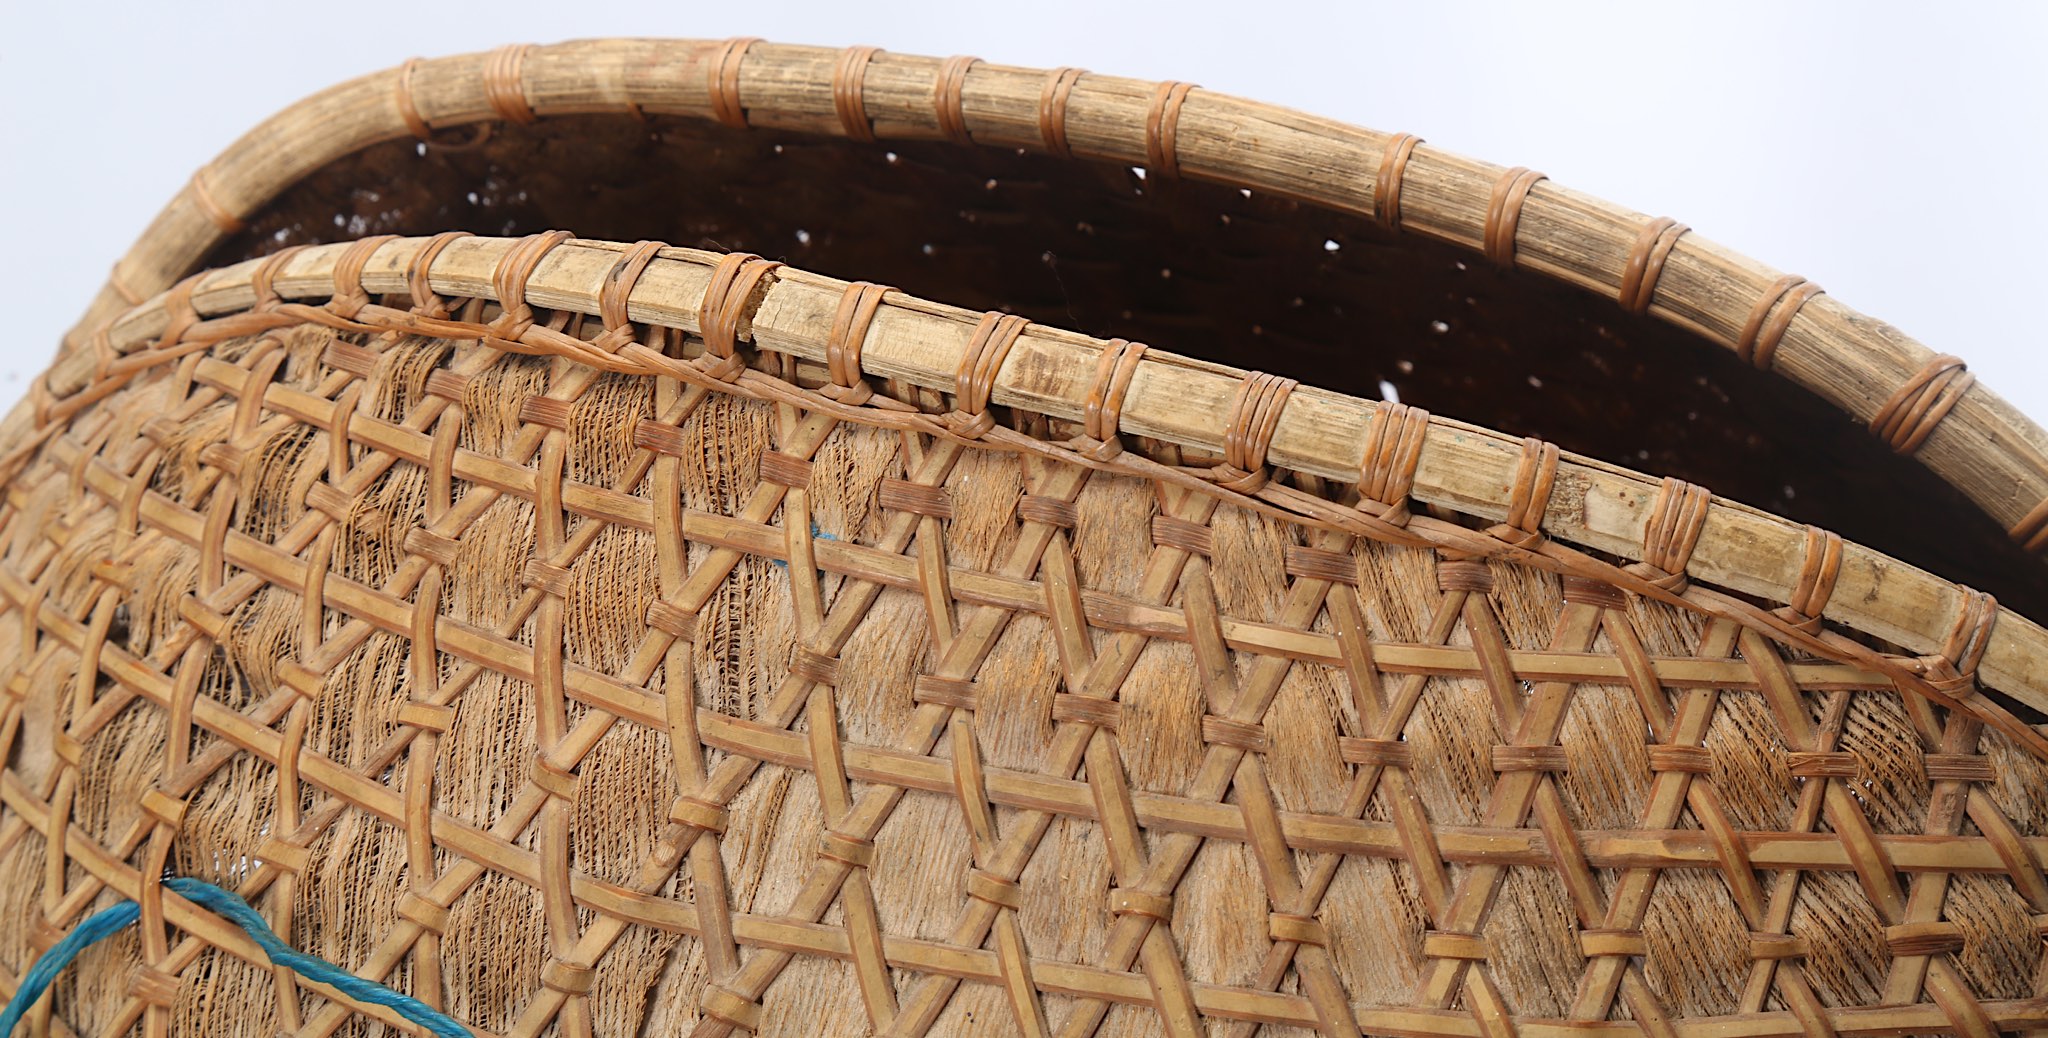 TWO BAMBOO AND RAFFIA LOBSTER BASKETS  Probably from Indonesia, with a flat base the body of the - Image 2 of 3